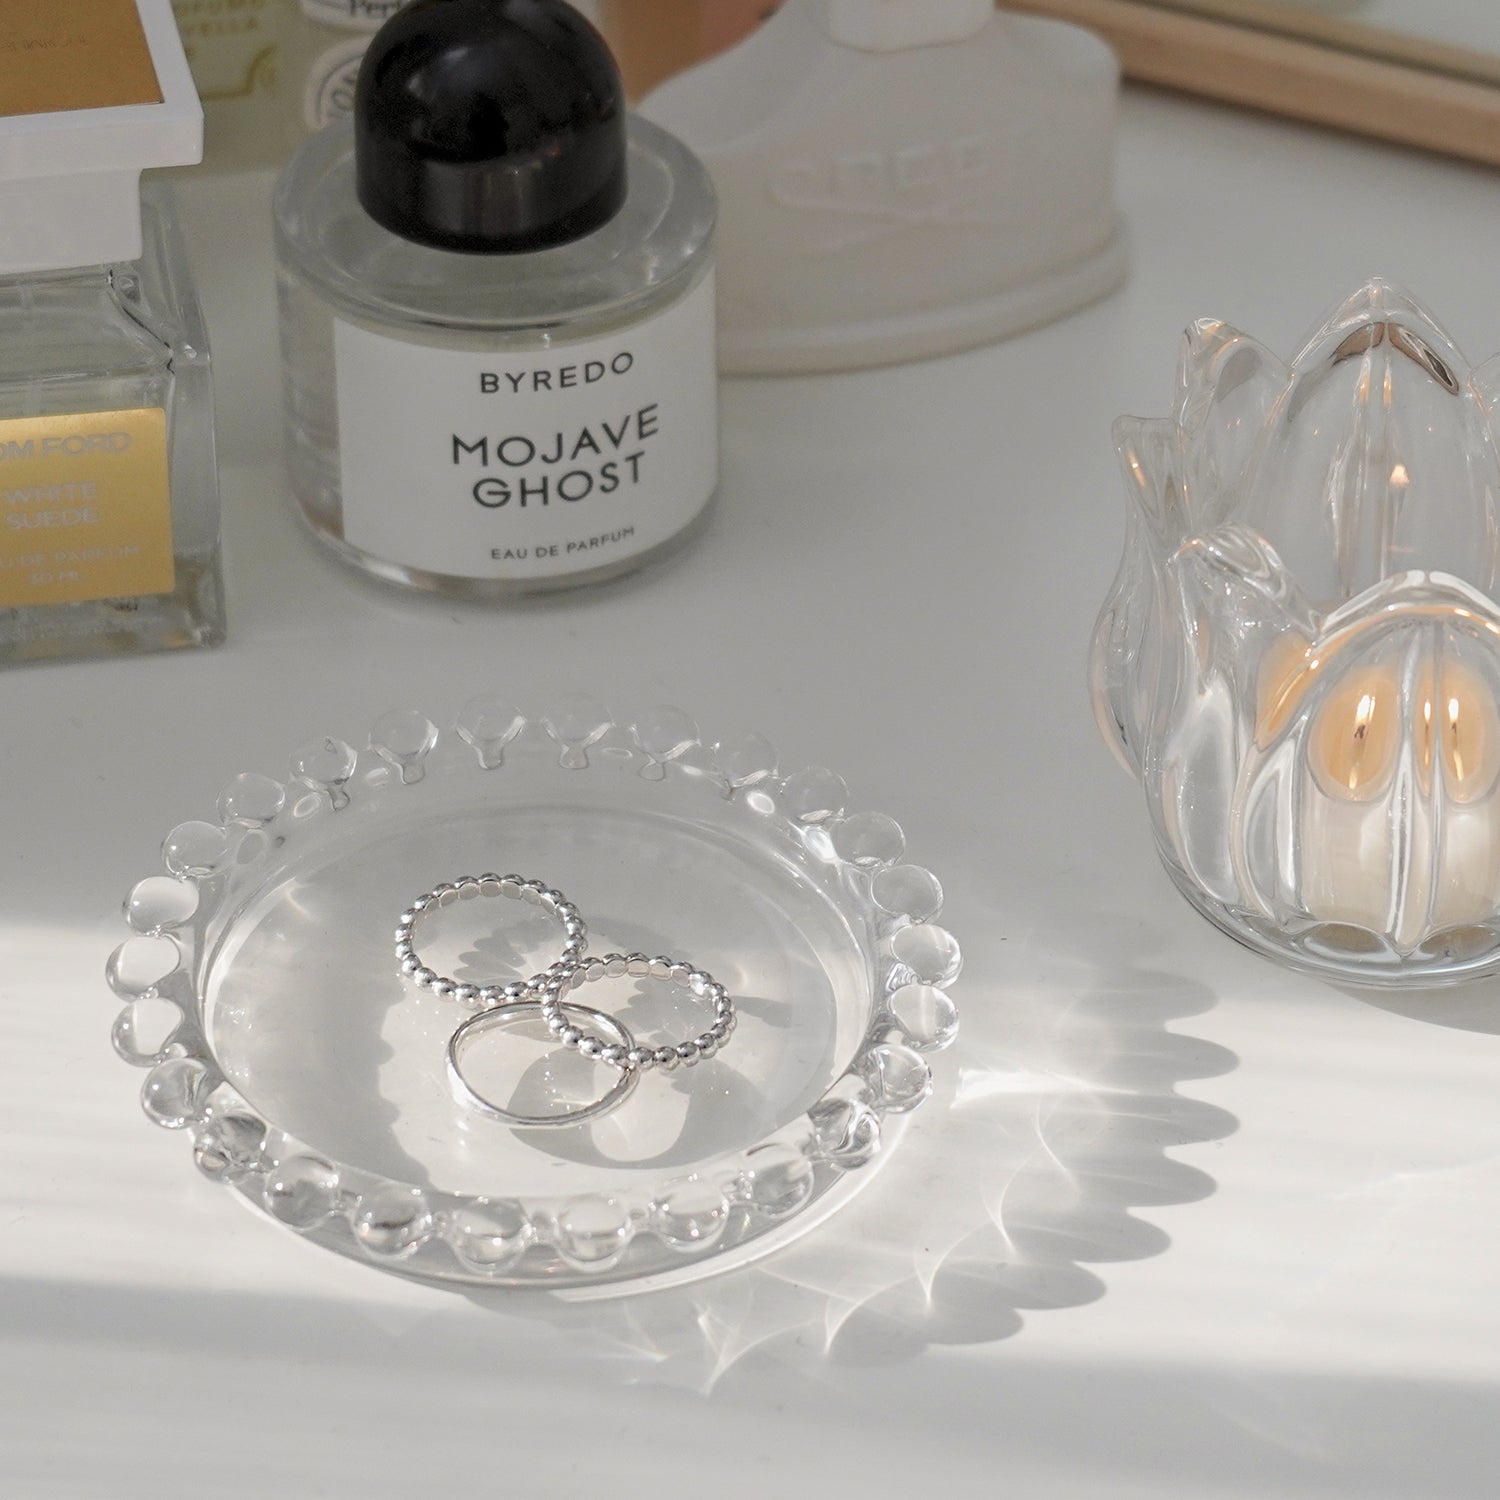 mini beaded clear round tray with silver rings and a lit tealight candle in a tulip flower shape glass tealight candle holders on vanity table with byredo, creed, and tom ford perfumes